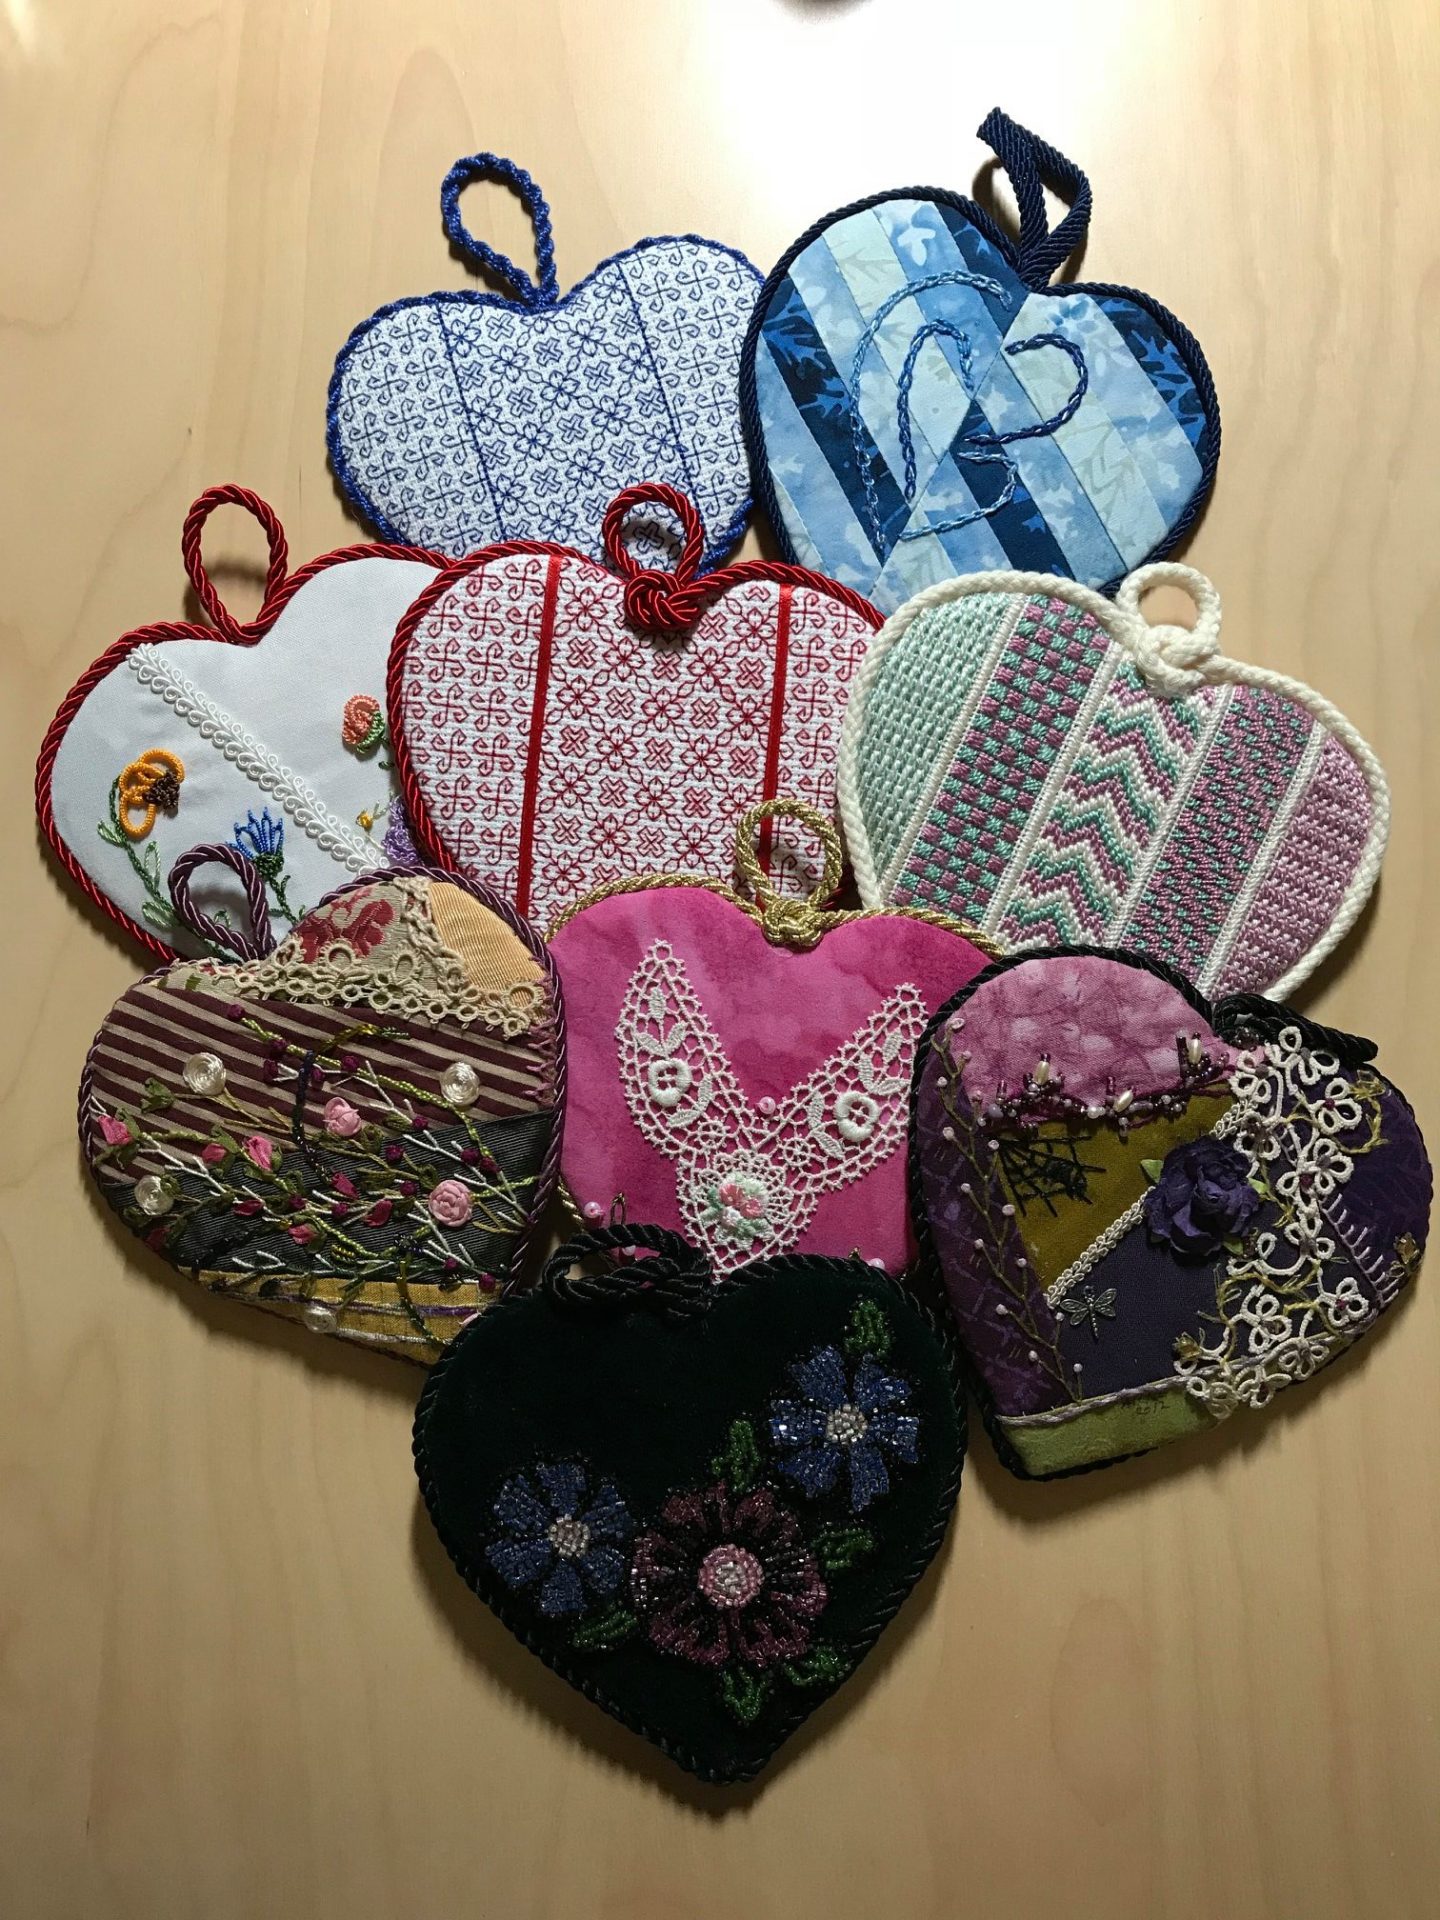 July Stitch-a-long: Outreach Project with Hearts for Hospice